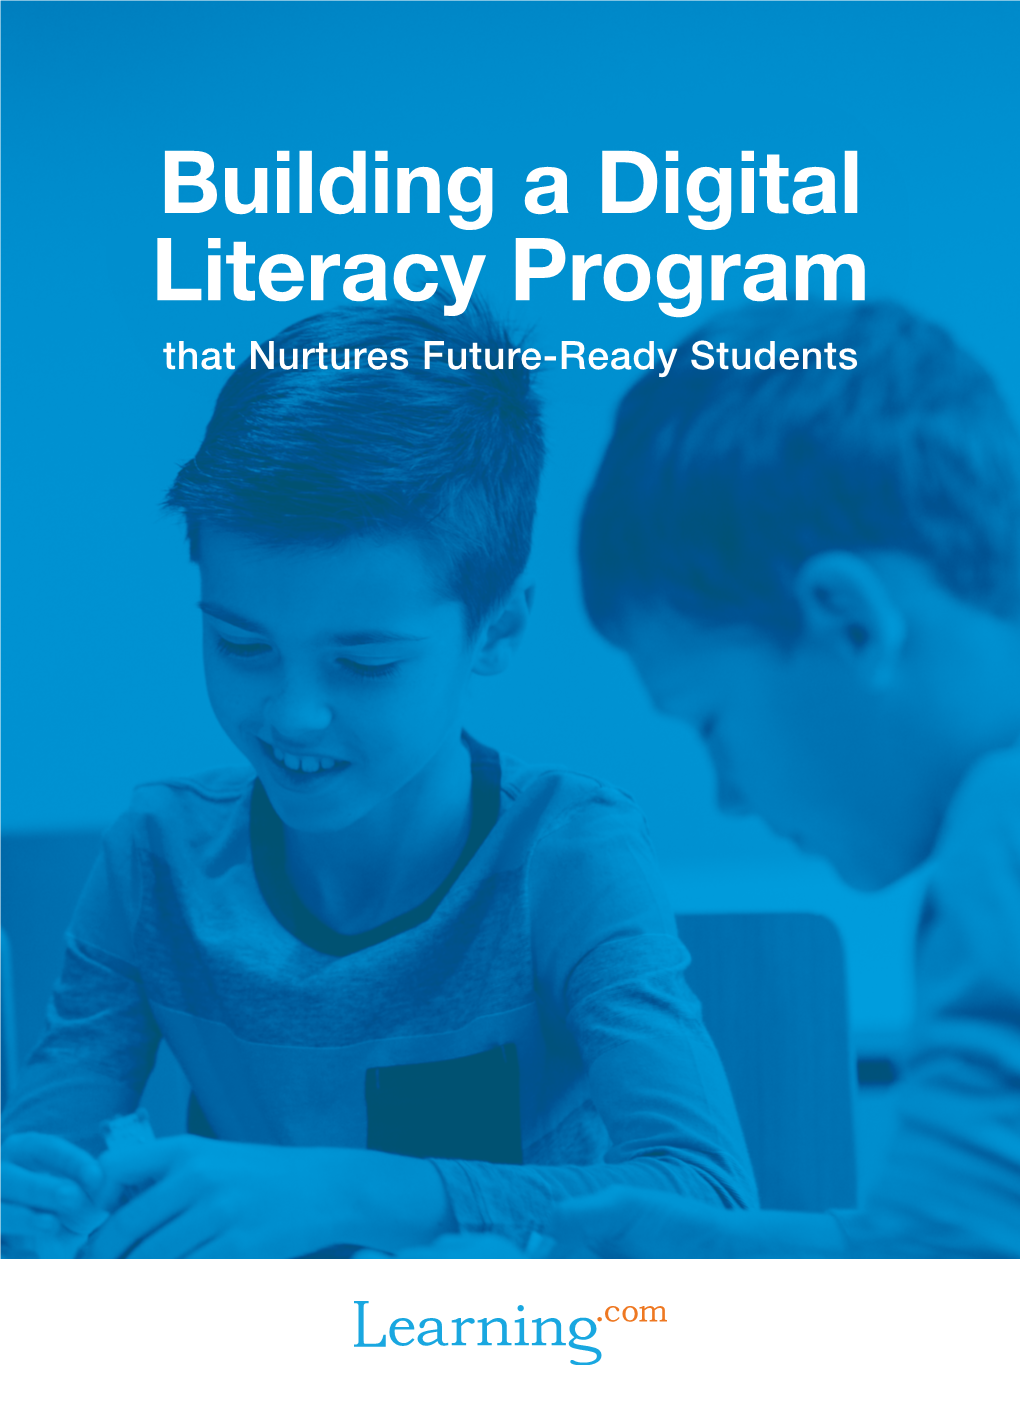 Building a Digital Literacy Program That Nurtures Future-Ready Students CONTENTS